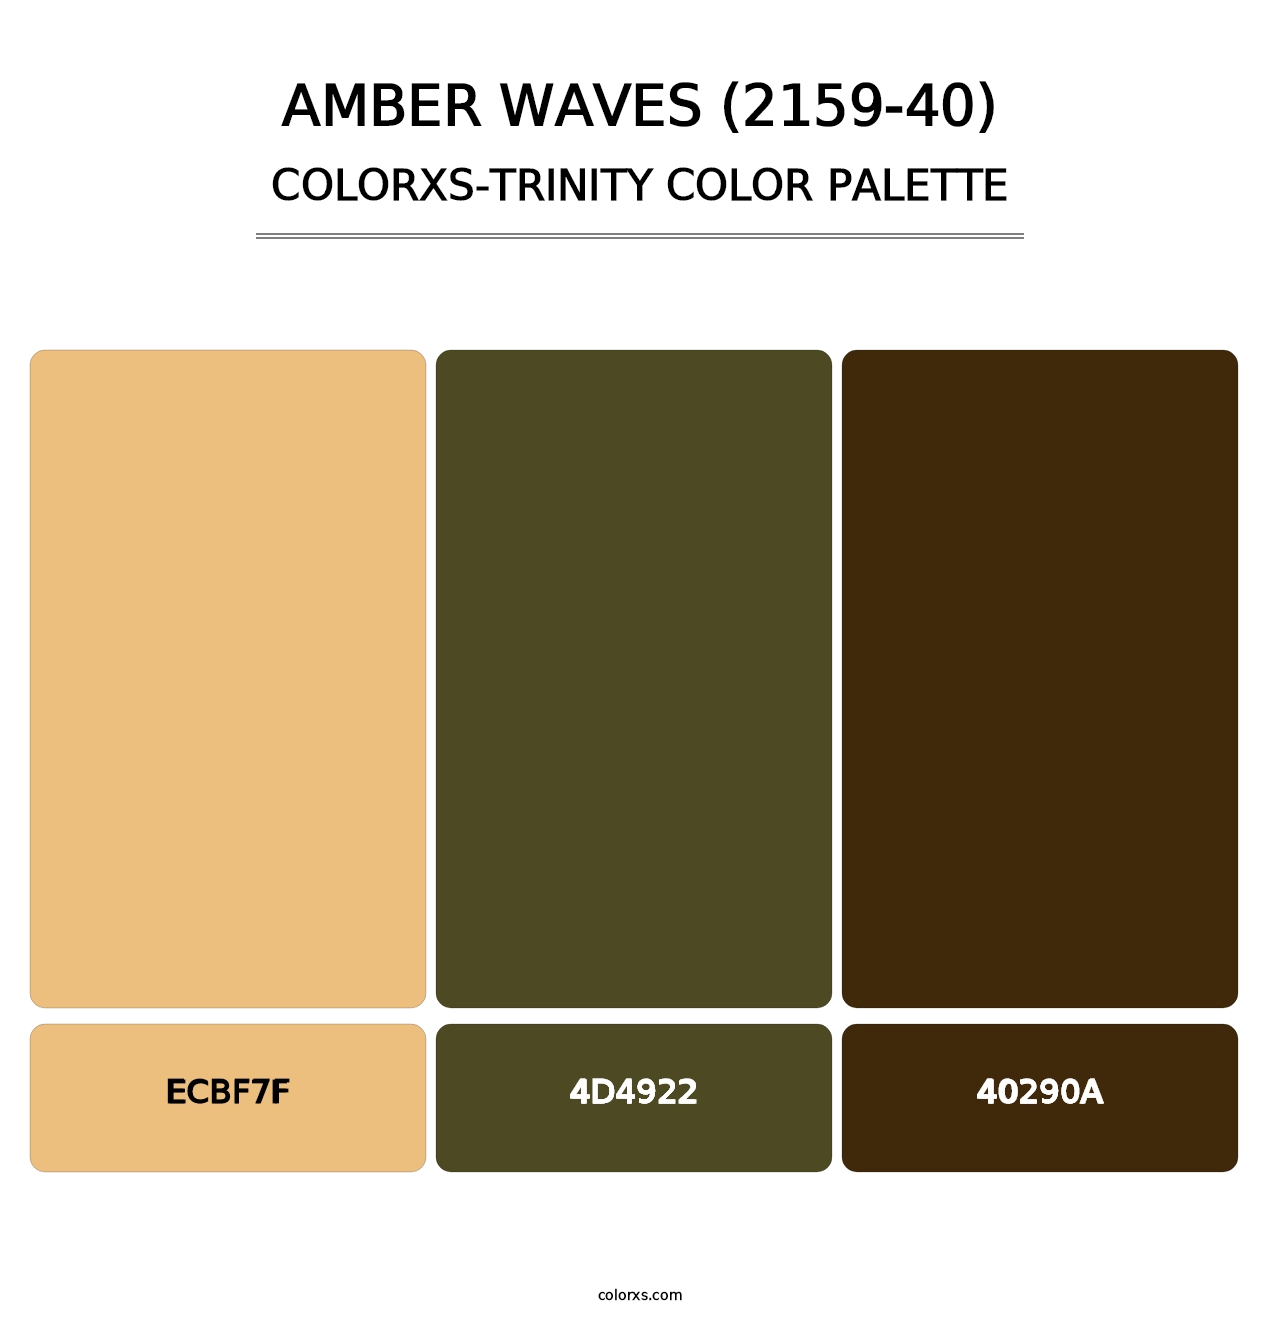 Amber Waves (2159-40) - Colorxs Trinity Palette